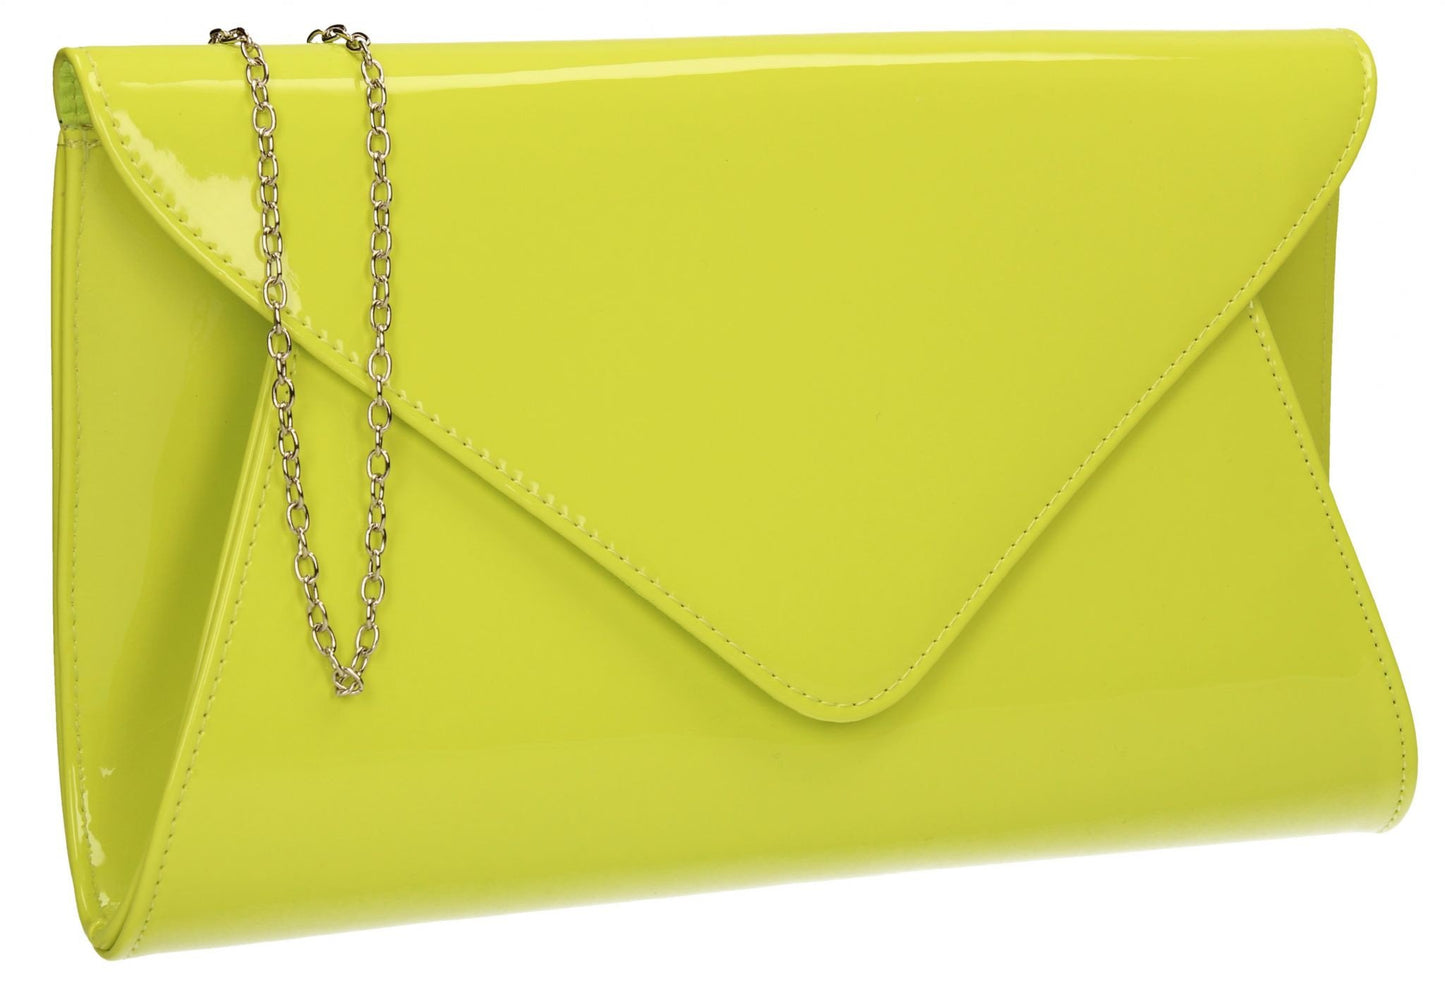 SWANKYSWANS Juliet Patent Envelope Clutch Bag Lime Cute Cheap Clutch Bag For Weddings School and Work